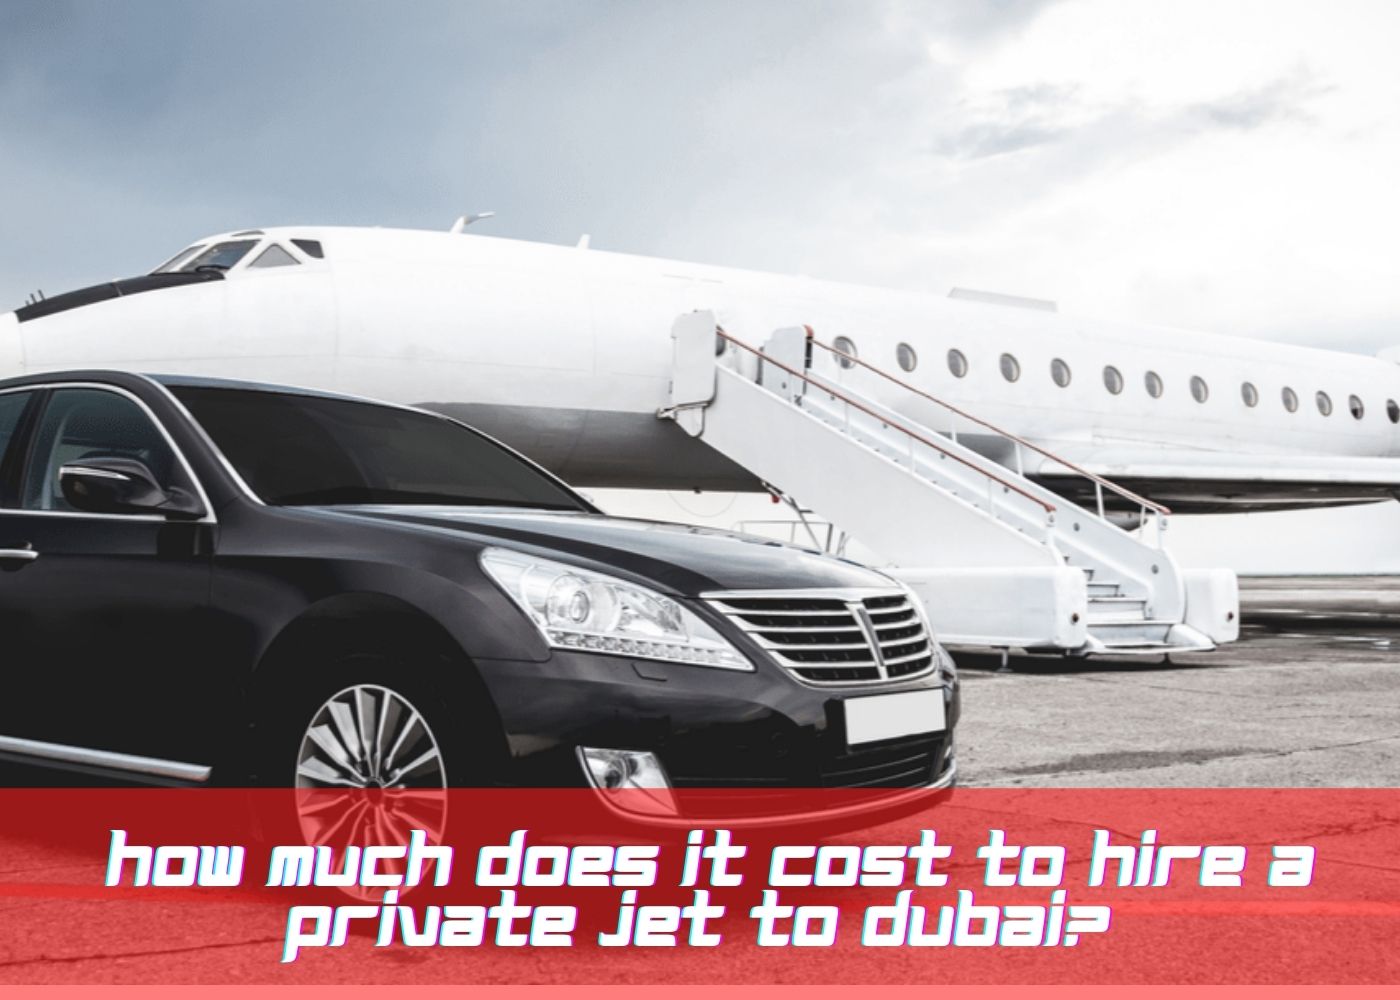 How much does it cost to hire a private jet to Dubai? 